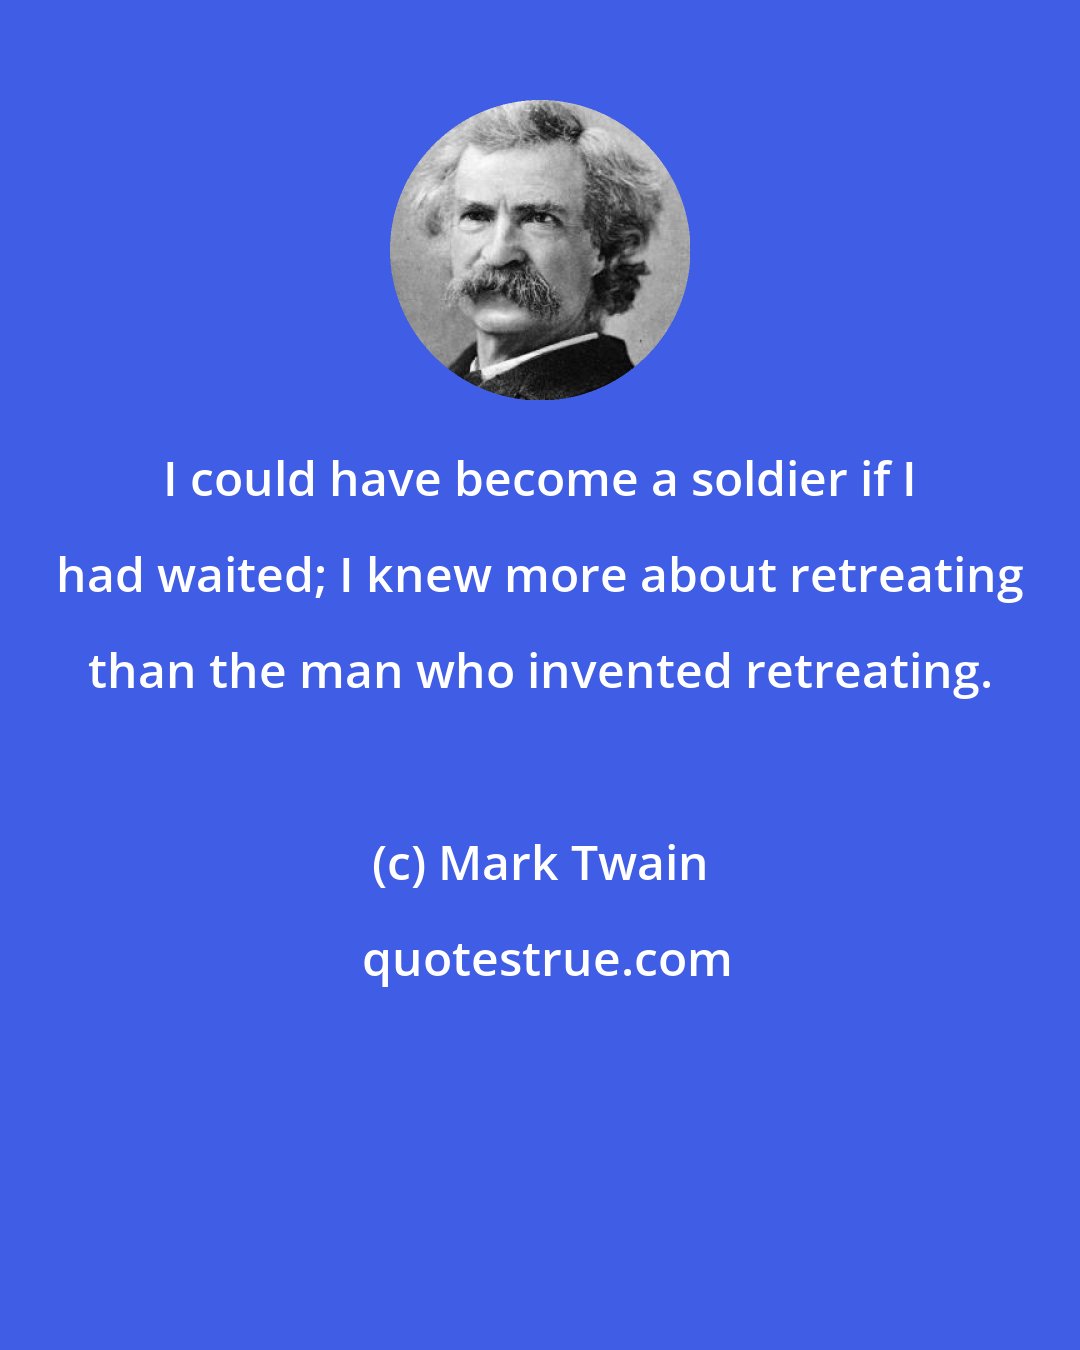 Mark Twain: I could have become a soldier if I had waited; I knew more about retreating than the man who invented retreating.